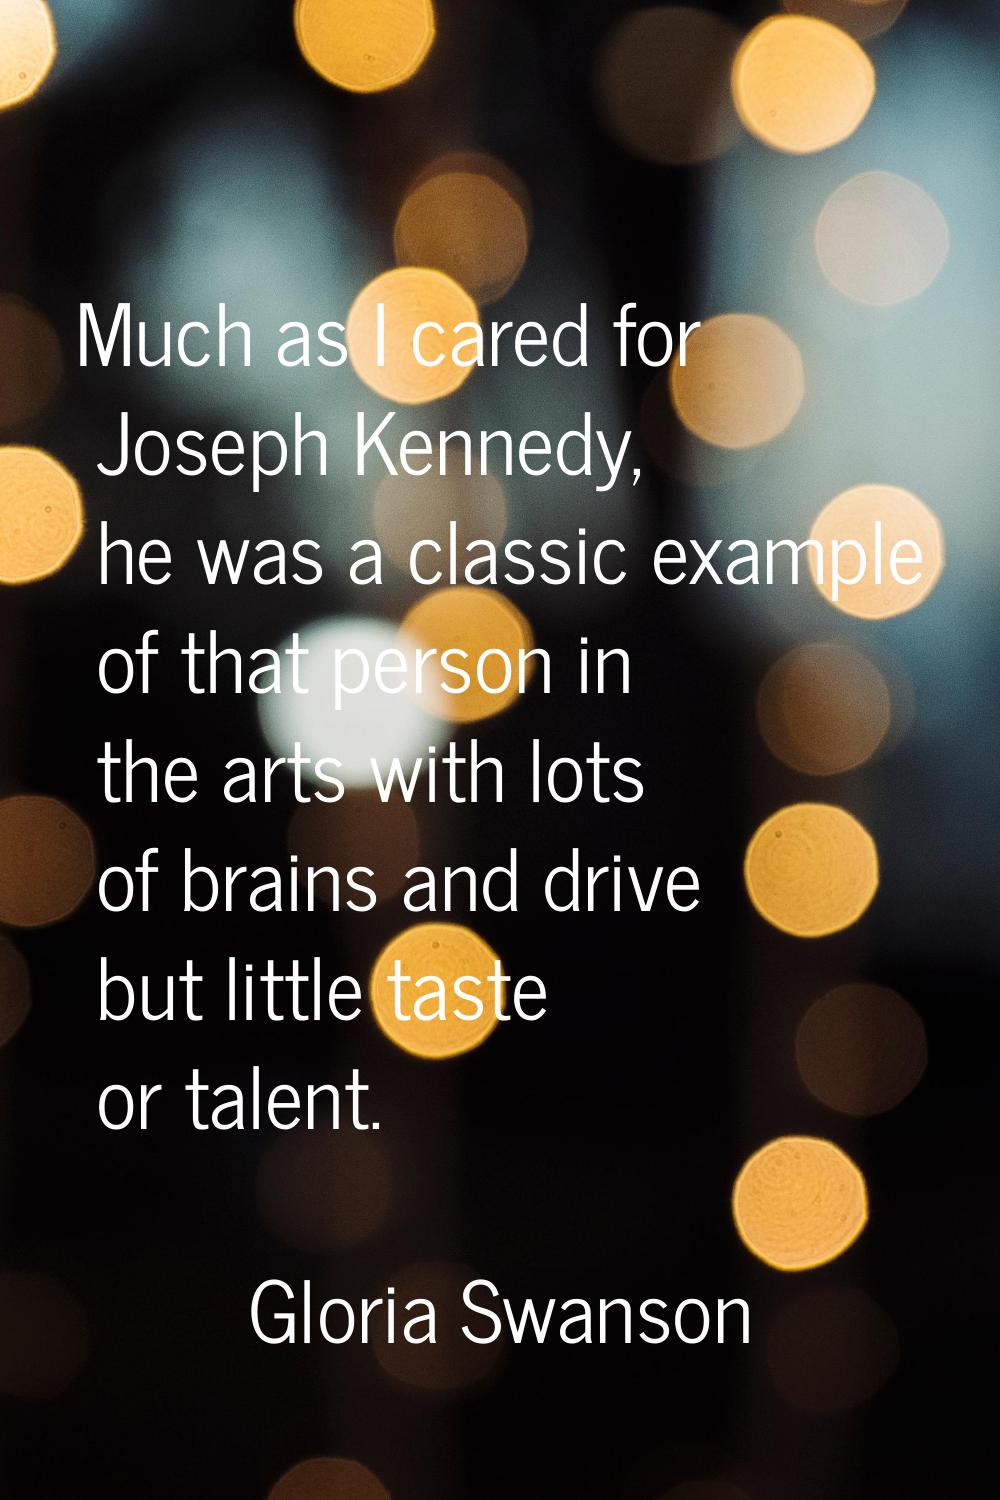 Much as I cared for Joseph Kennedy, he was a classic example of that person in the arts with lots o